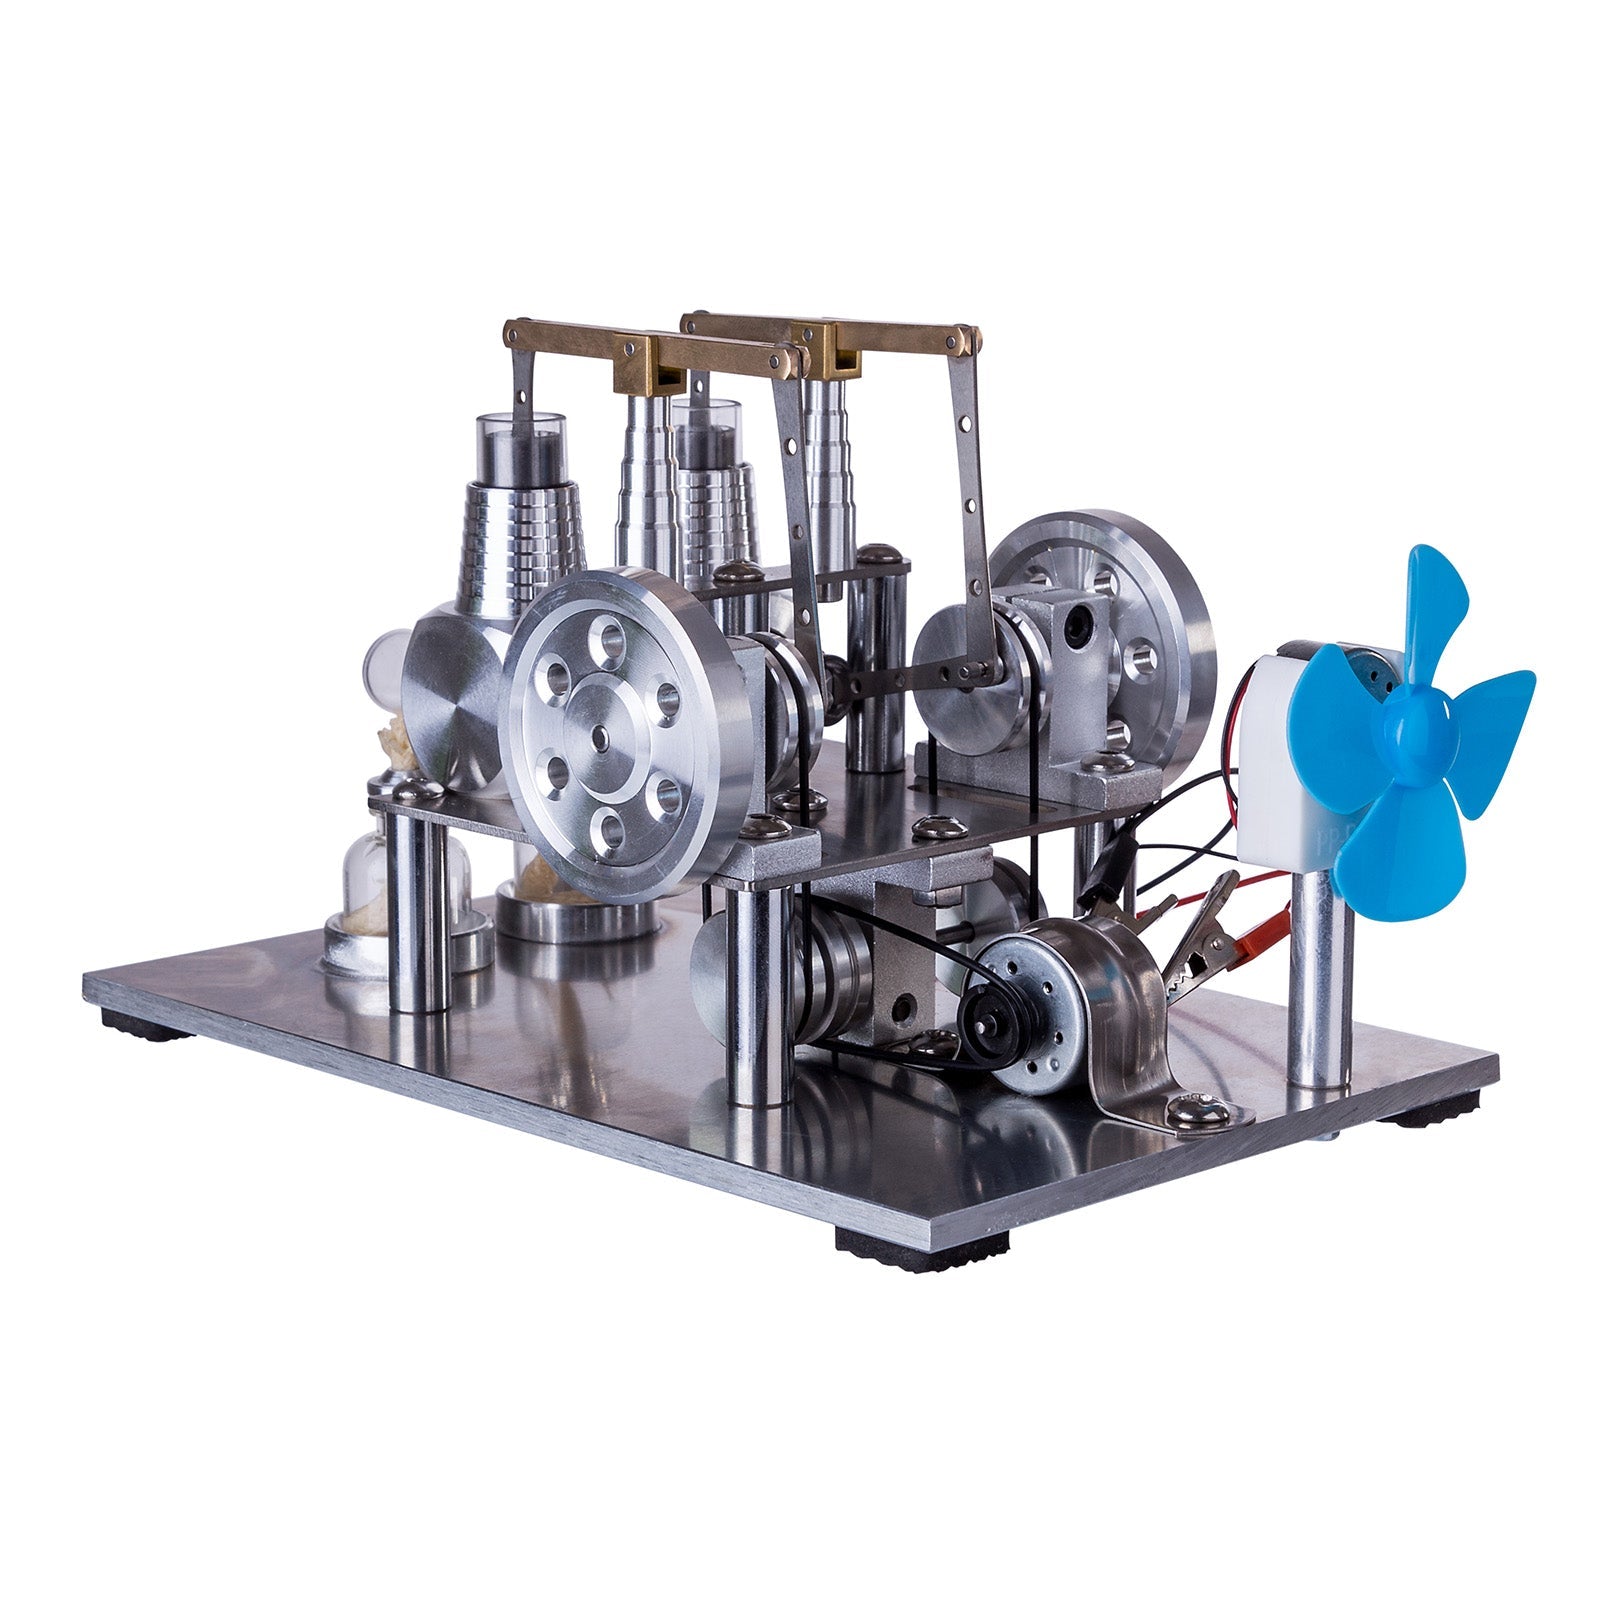 2 Cylinder Hot Air Stirling Engine Electricity Generator with Bulb, Voltage Meter, Fan enginediyshop